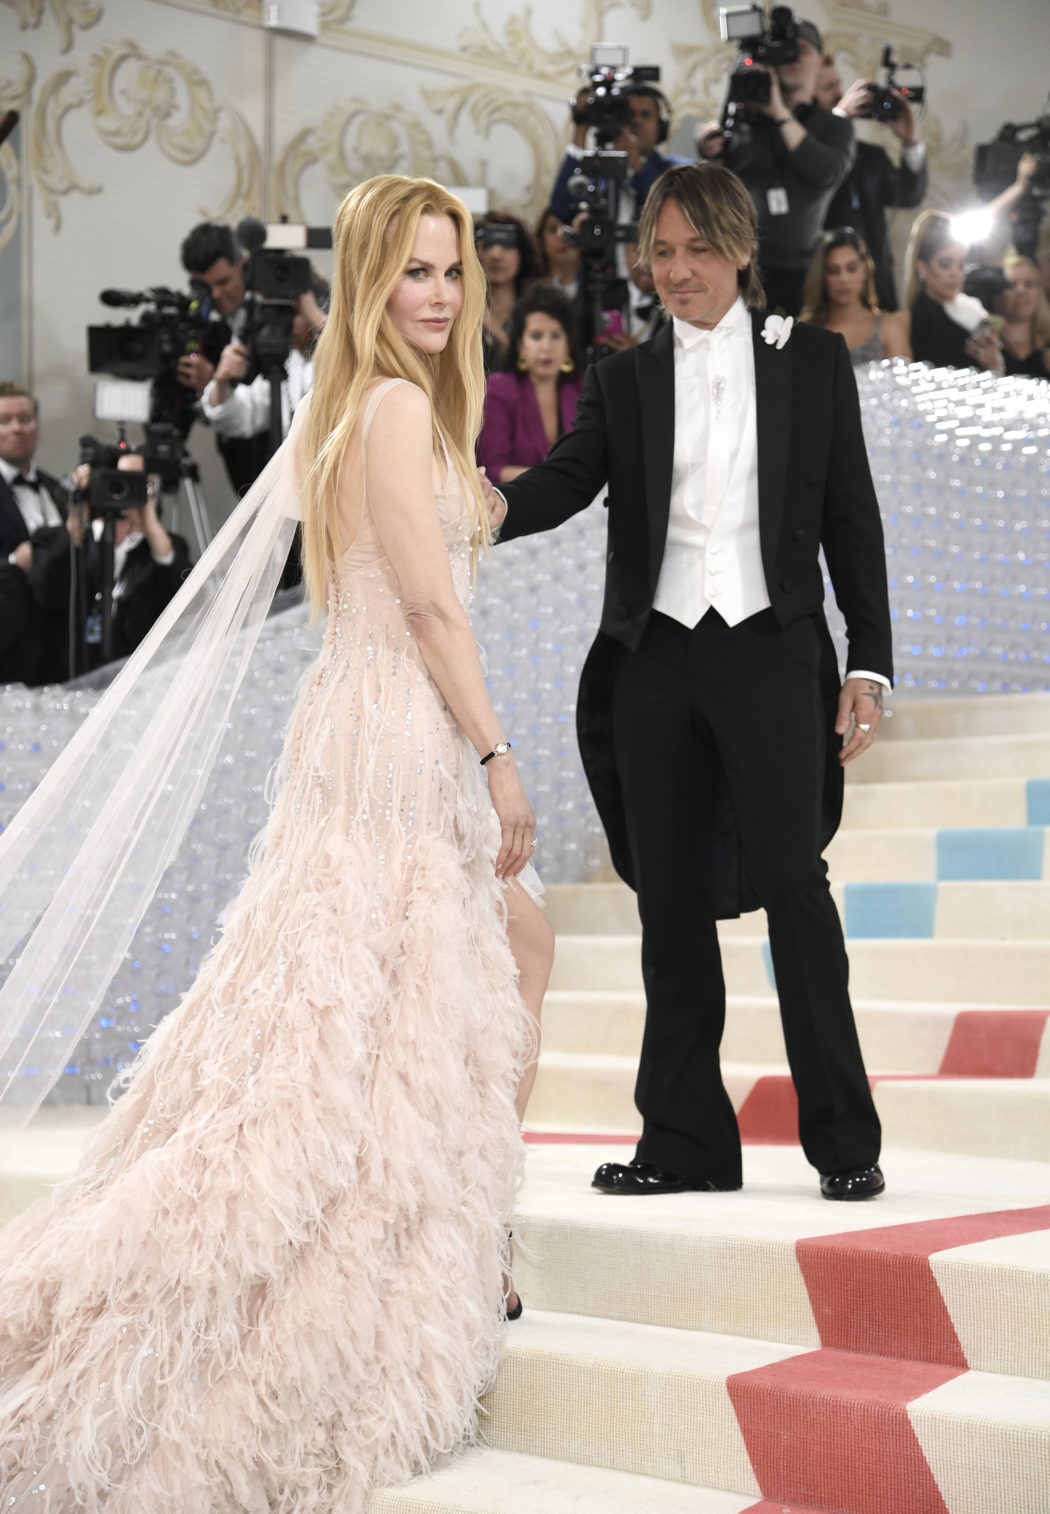 Nicole Kidman, left, and Keith Urban attend The Metropolitan Museum of Art’s Costume Institute benefit gala celebrating the opening of the “Karl Lagerfeld: A Line of Beauty” exhibition on Monday, May 1, 2023, in New York. (Photo by Evan Agostini/Invision/AP)

Associated Press/LaPresse
Only Italy and Spain